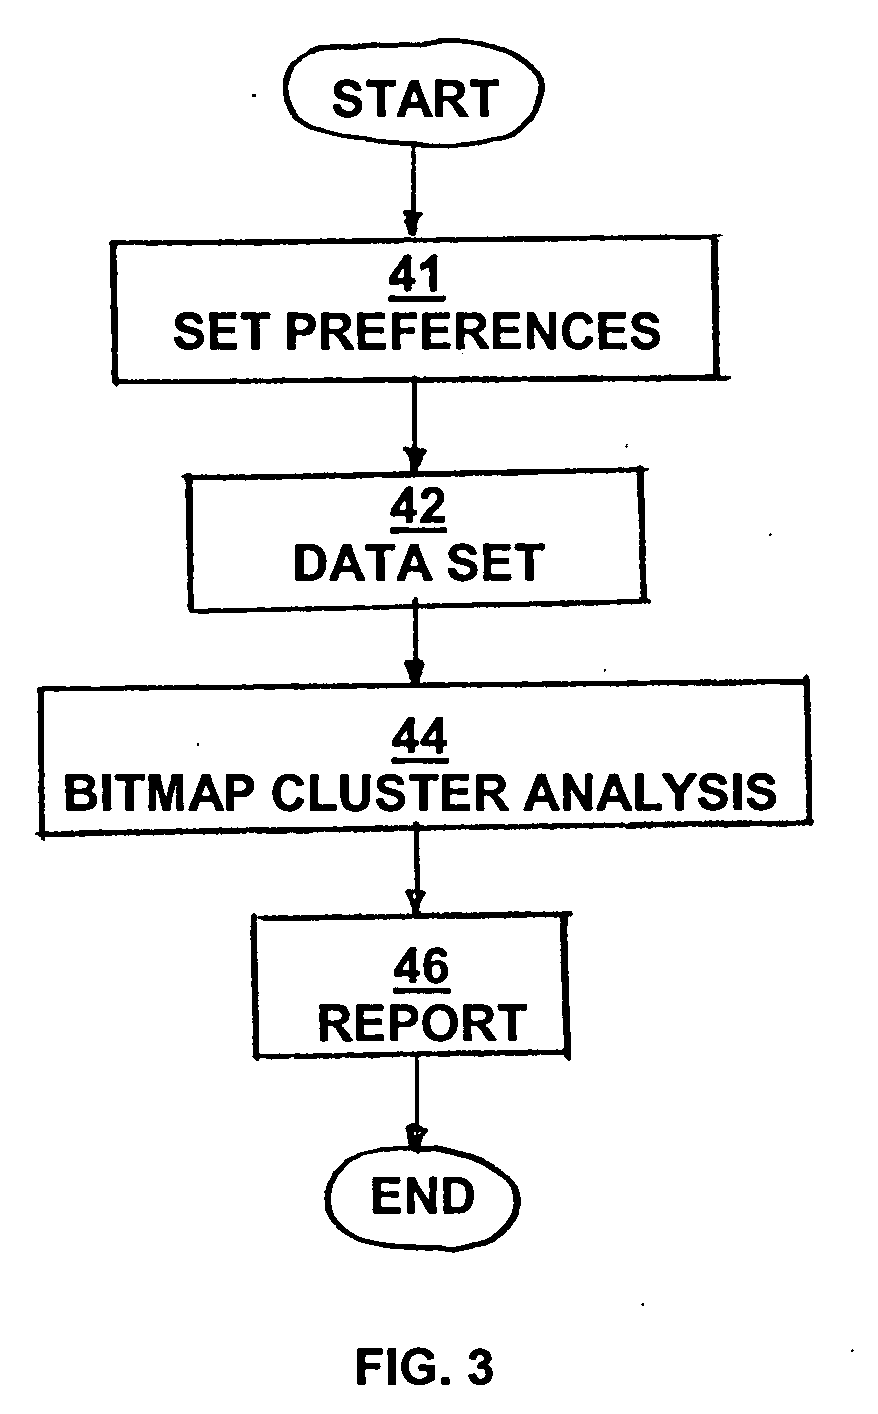 Bitmap cluster analysis of defects in integrated circuits